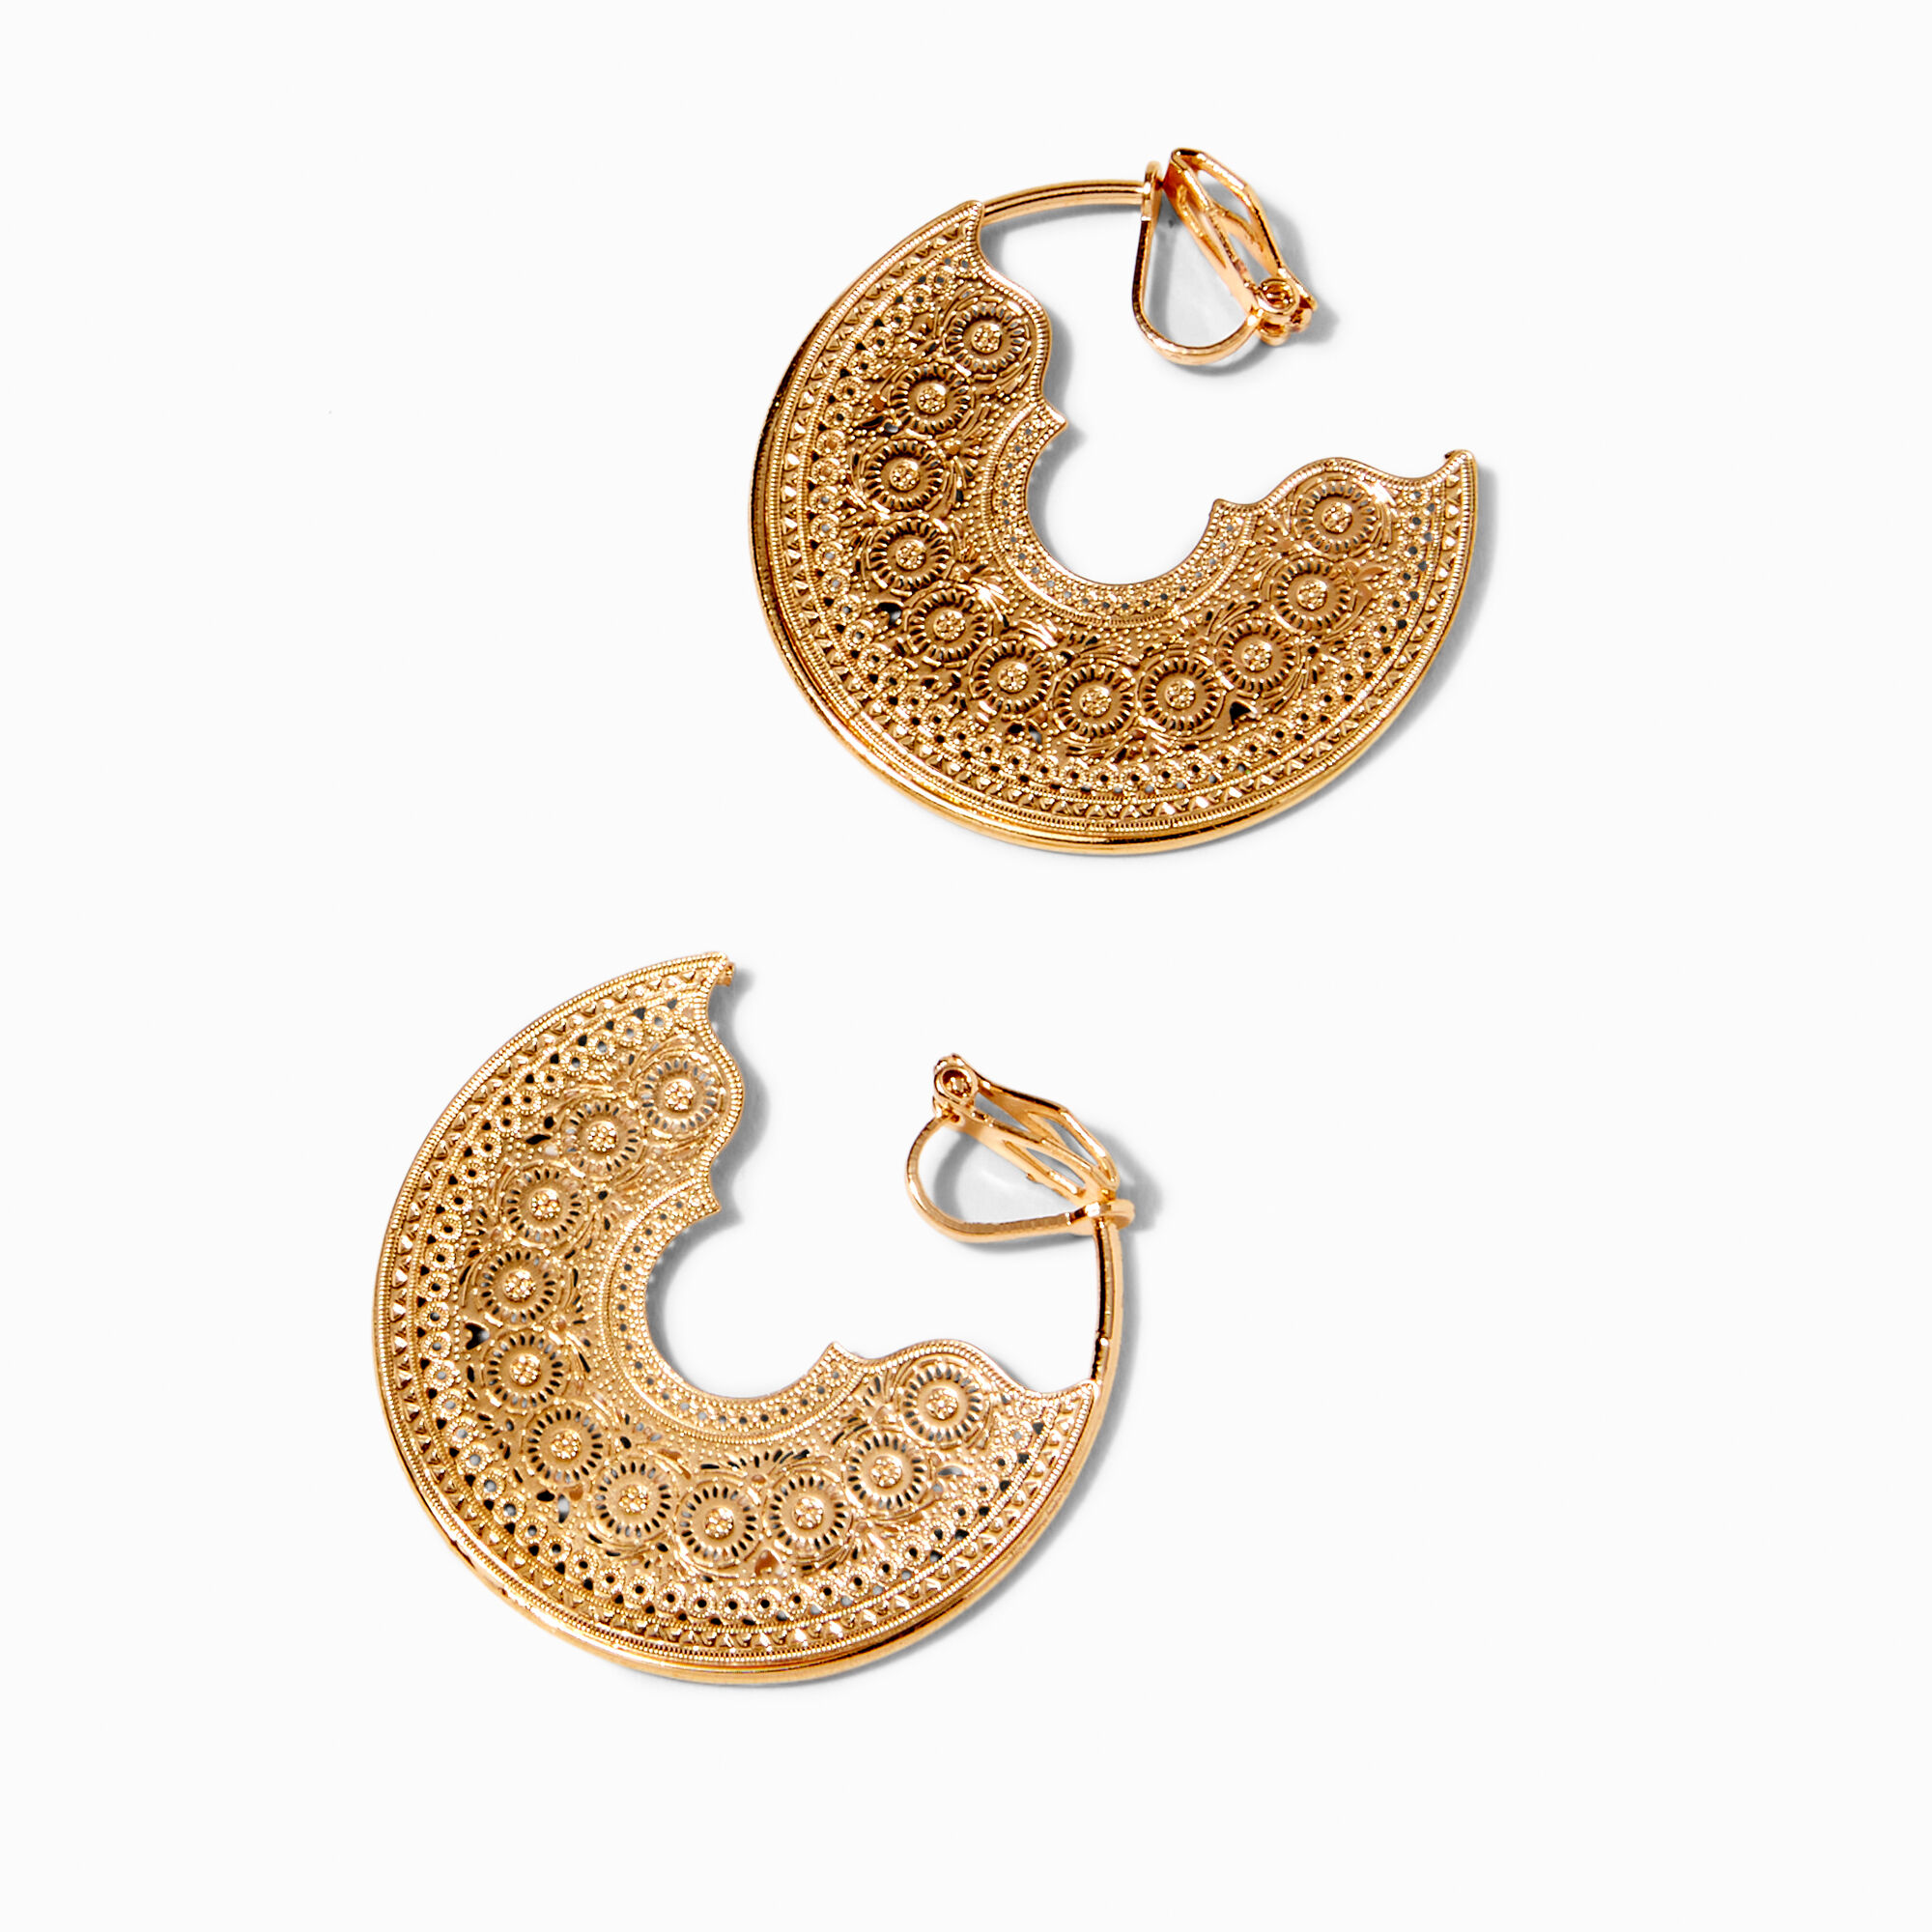 View Claires Tone 40MM Delicate Filigree ClipOn Earrings Gold information